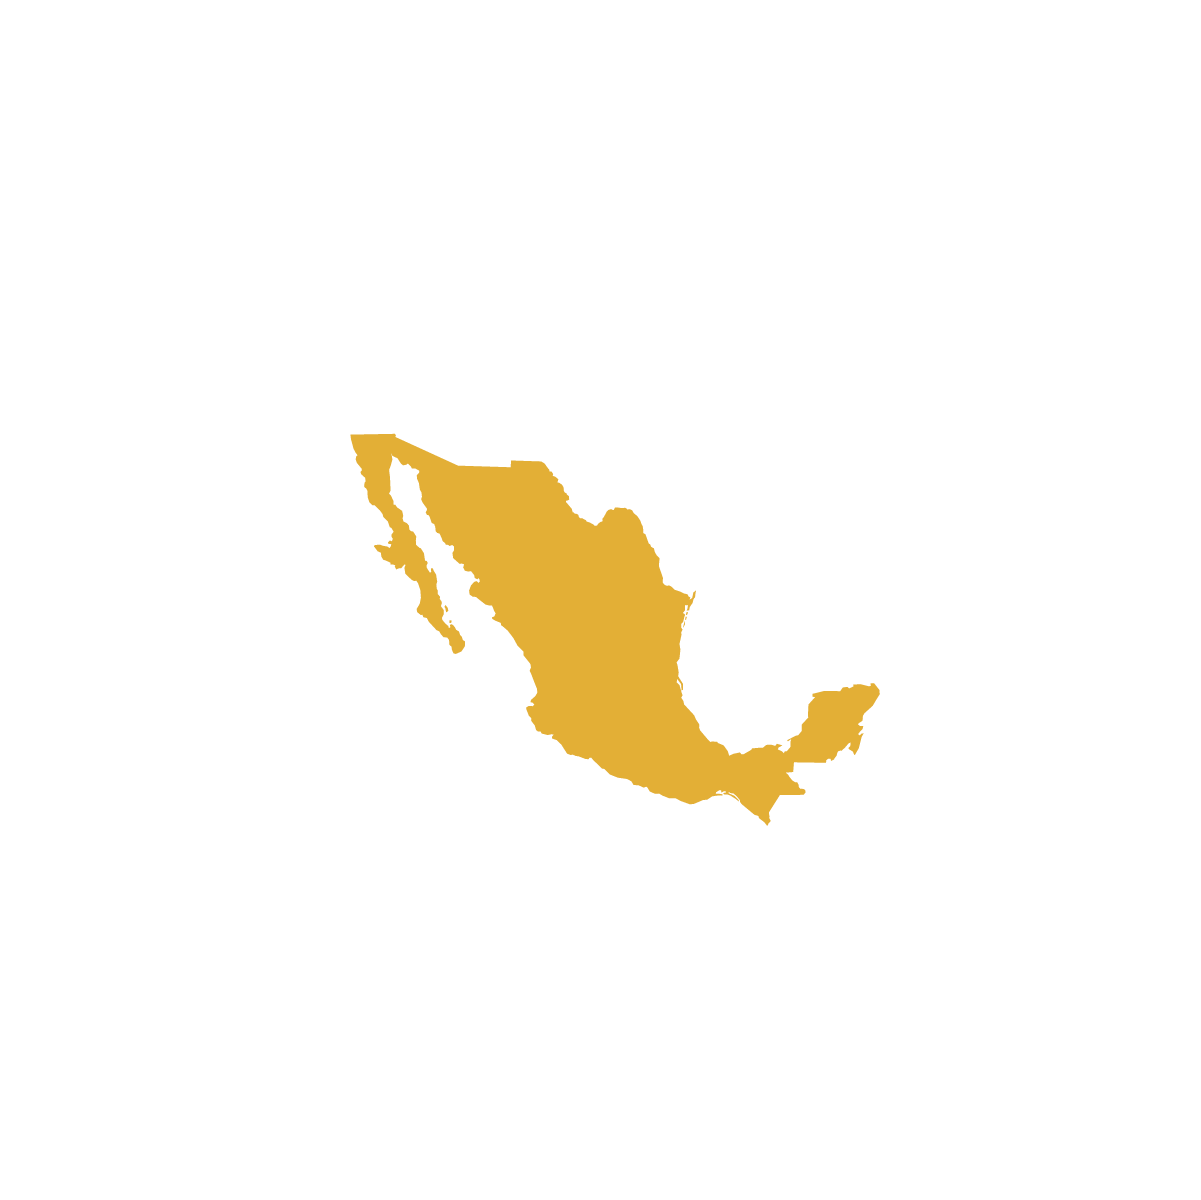 Image of Mexico